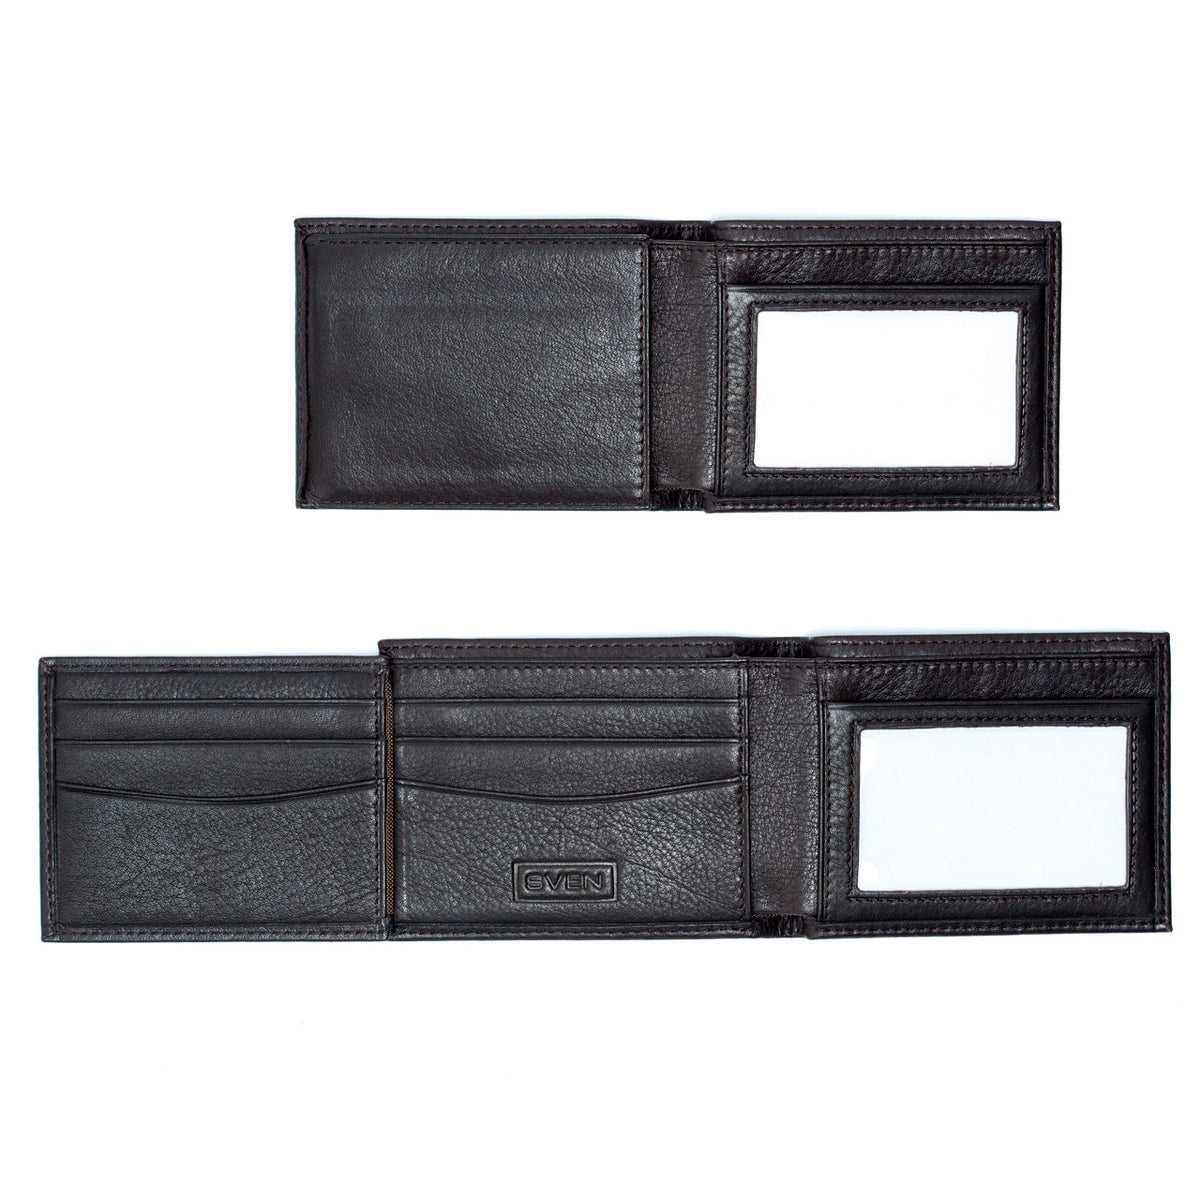 SVEN Style No. W23 Wallet black leather